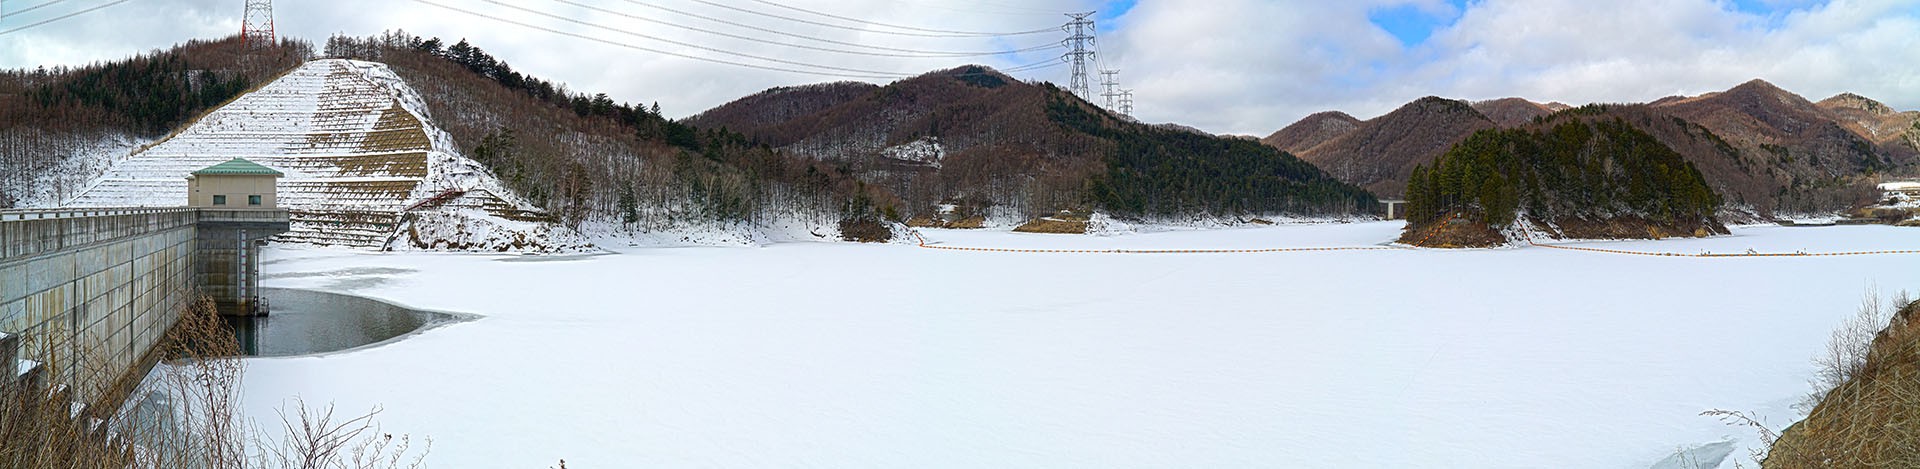 2016-02-12_11.10.32_SONY_ILCE-7S_ISO100_F8.0_1／500sec-panorama